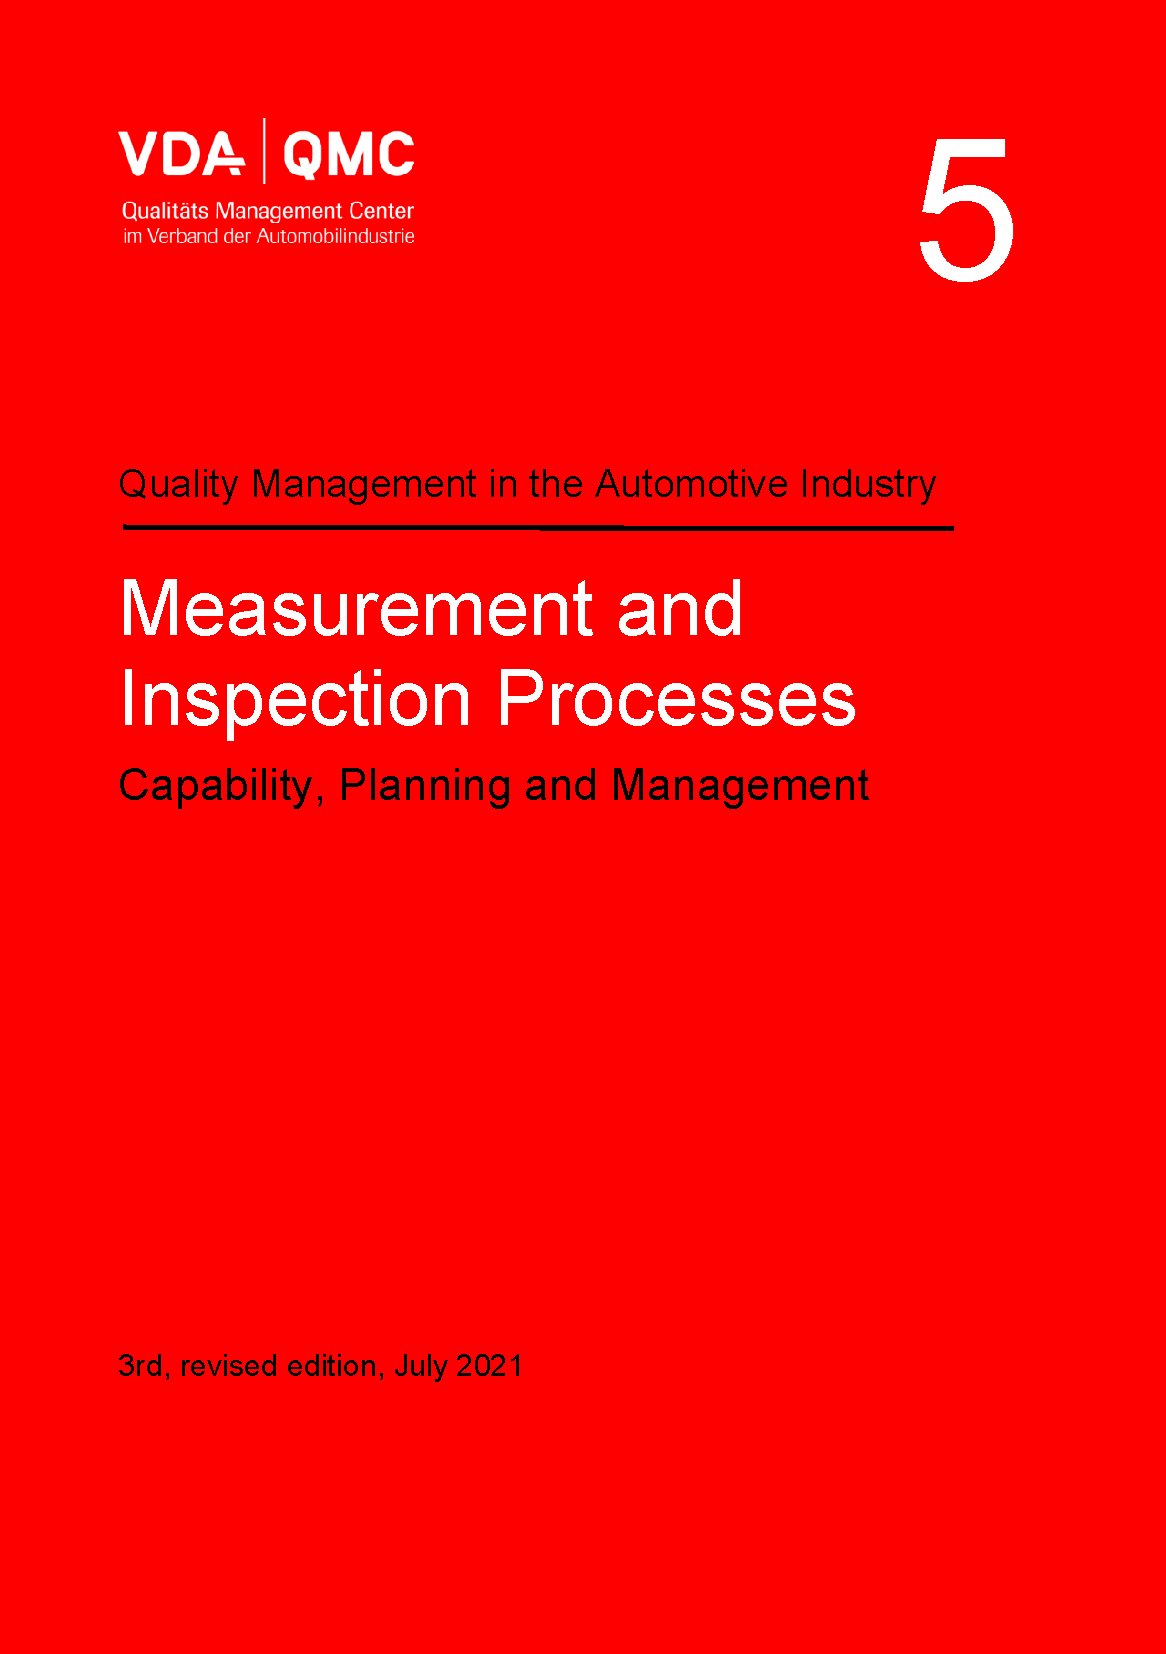 Publikation  VDA Volume 5 Measurement and Inspection Processes.
 Capability, Planning and Management, 3rd revised edition, July 2021 1.7.2021 Ansicht